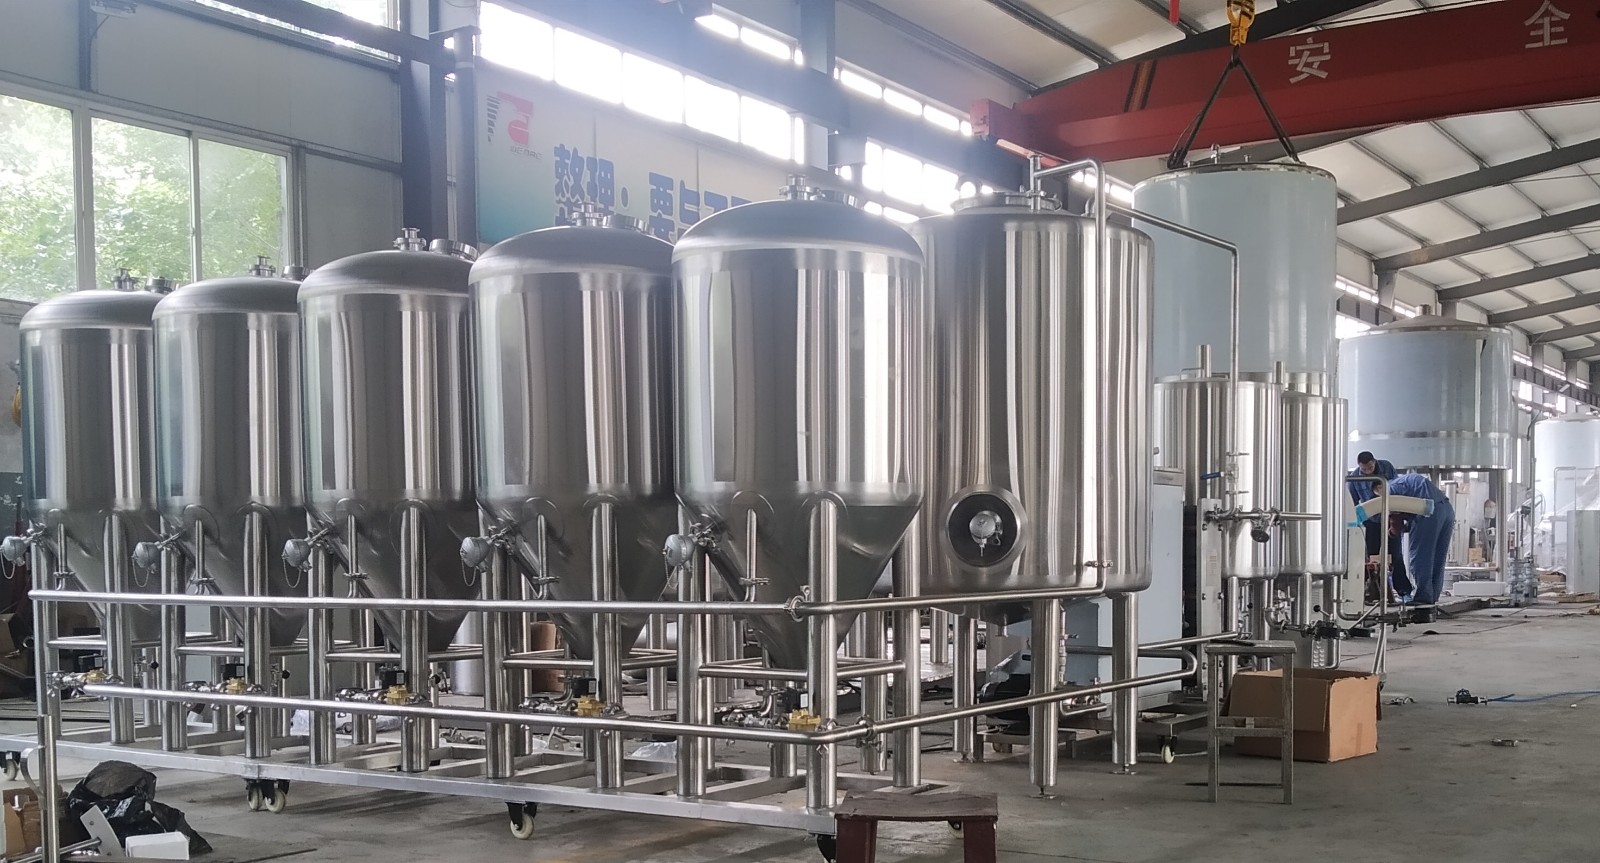 Pakistan auto small size craft beer brewing equipment of Stainless steel from China factory 2020 W1